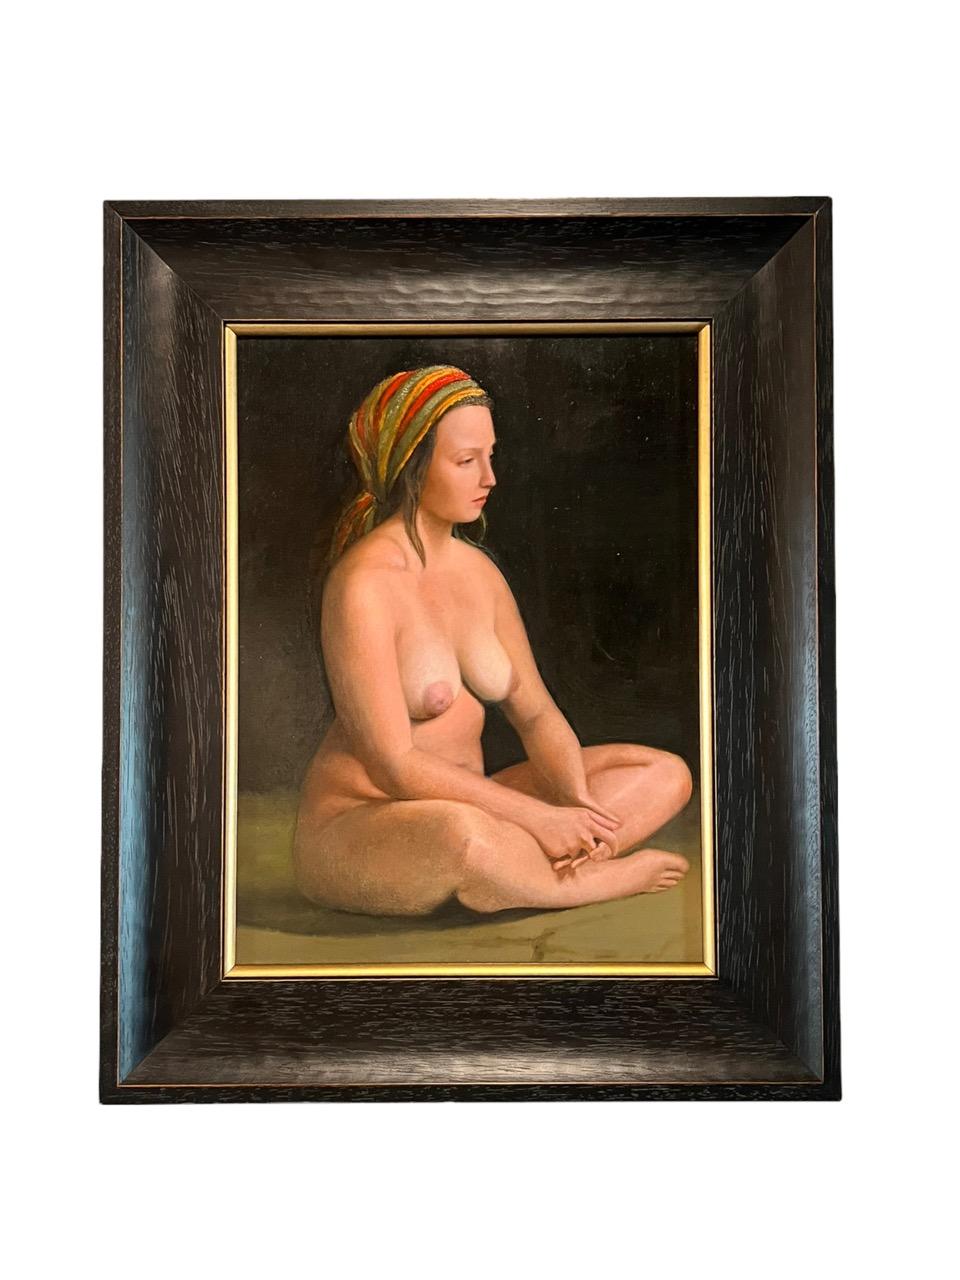 Oil on hardboard painting by Argentinian contemporary artist Diego Cabral in 2021 of a realistic naked woman. The artist likes to portray and embrace the real beauty of natural women's bodies. 

Only one painting, the other painting is also